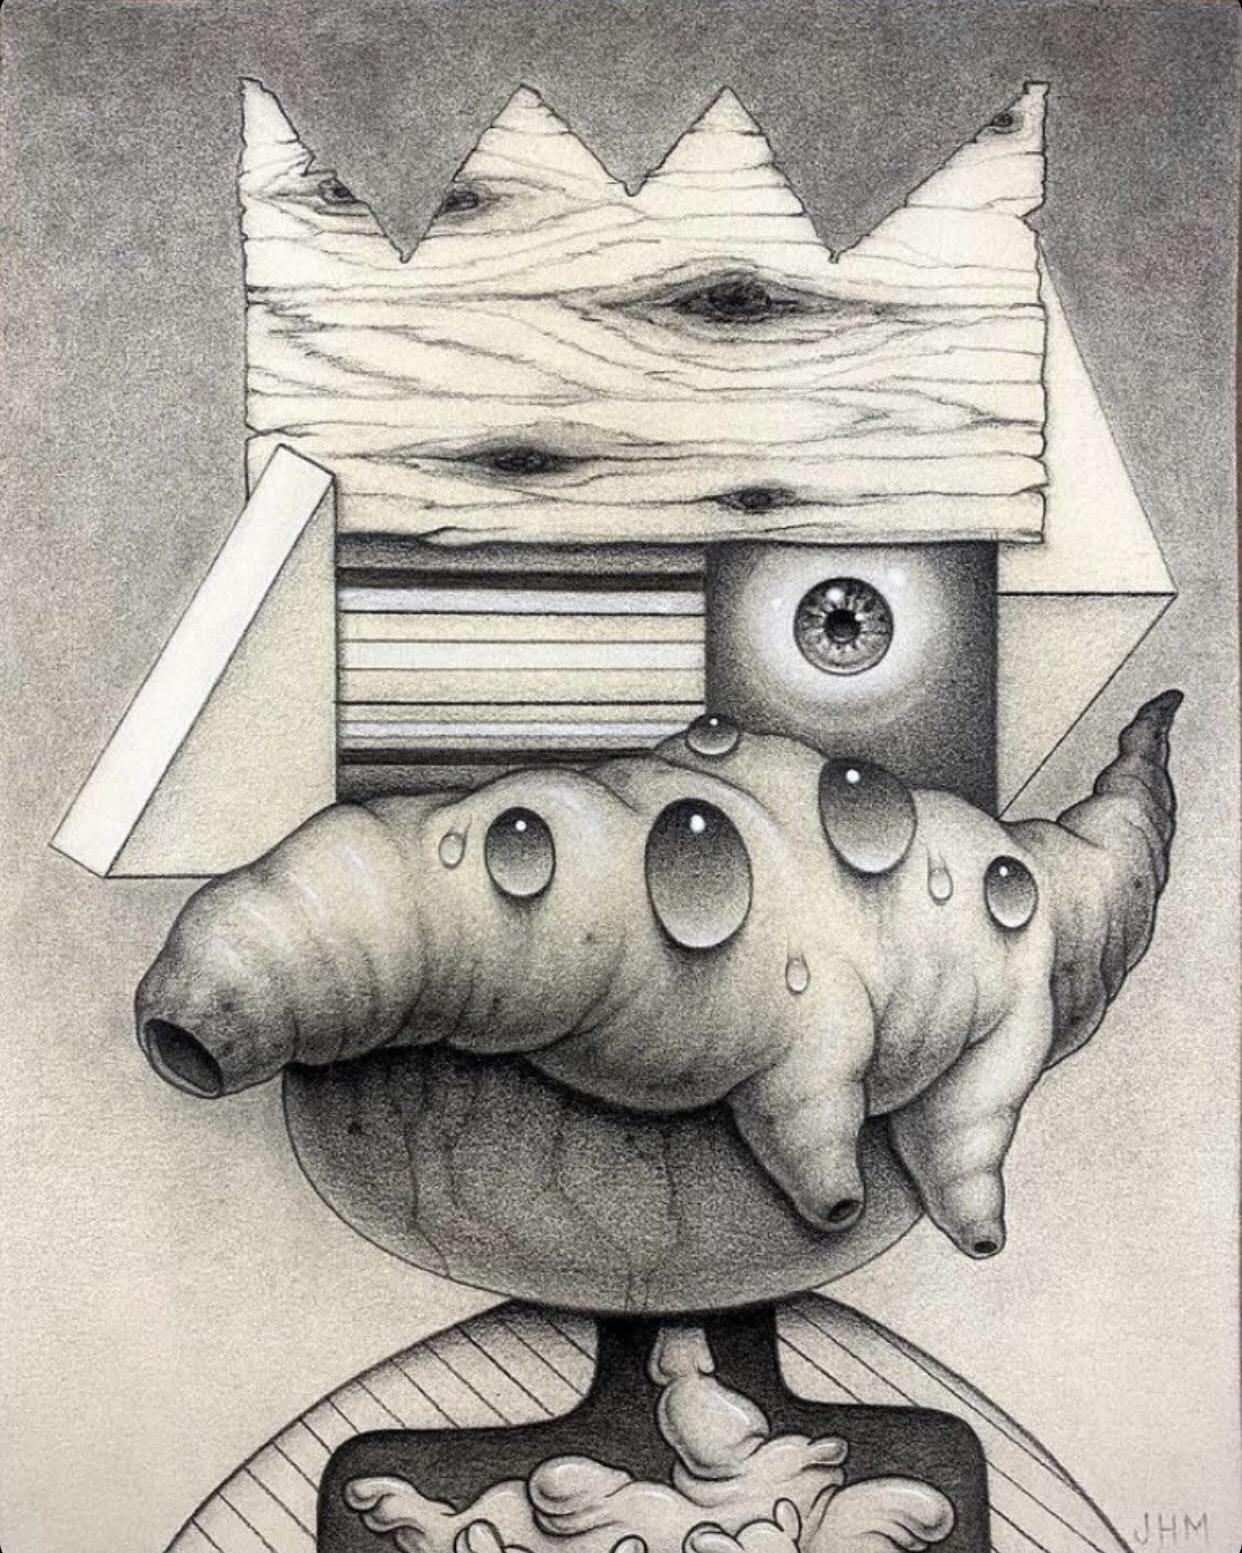 Justin Henry Miller, False King, 2019, Graphite, acrylic, and coffee on paper, 10” x 8”